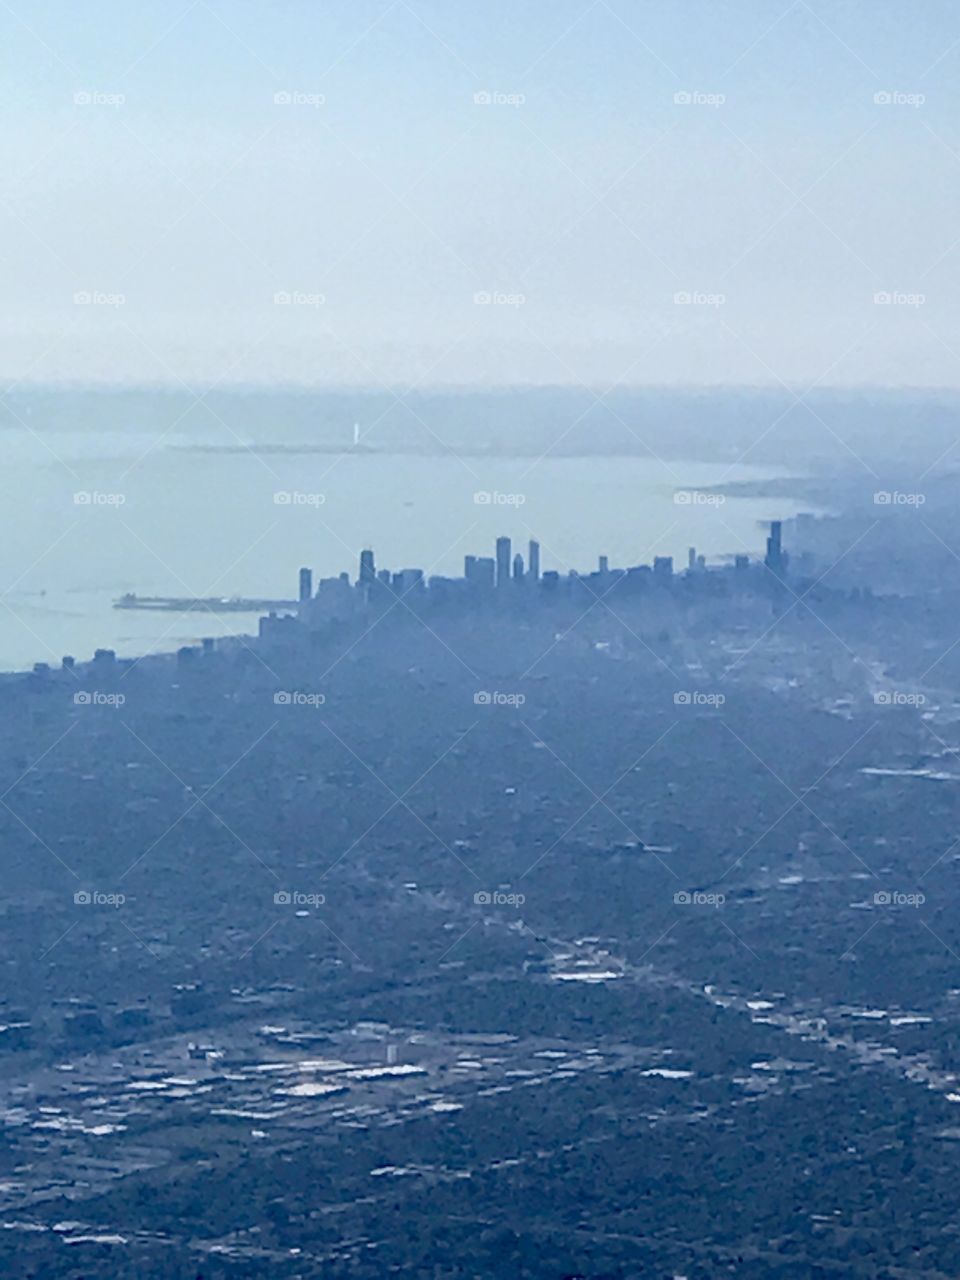 Chicago from the sky